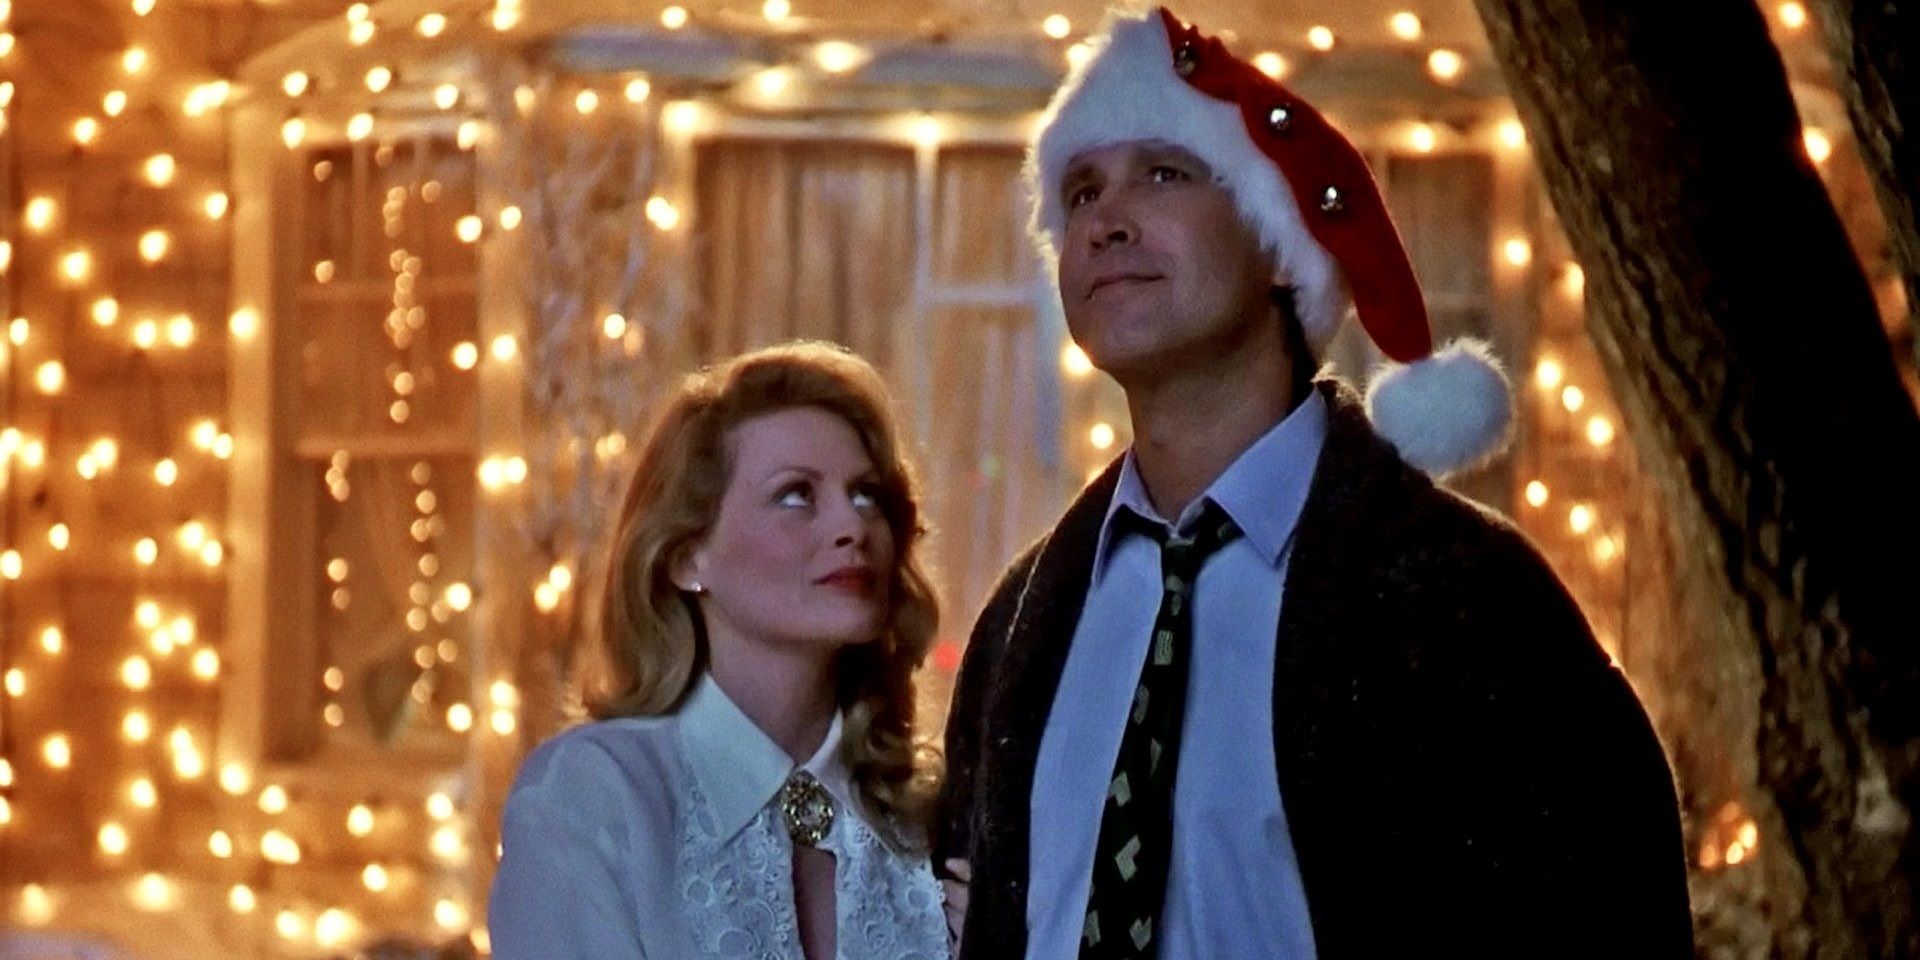 Clark and Ellen standing outside in National Lampoon's Christmas Vacation